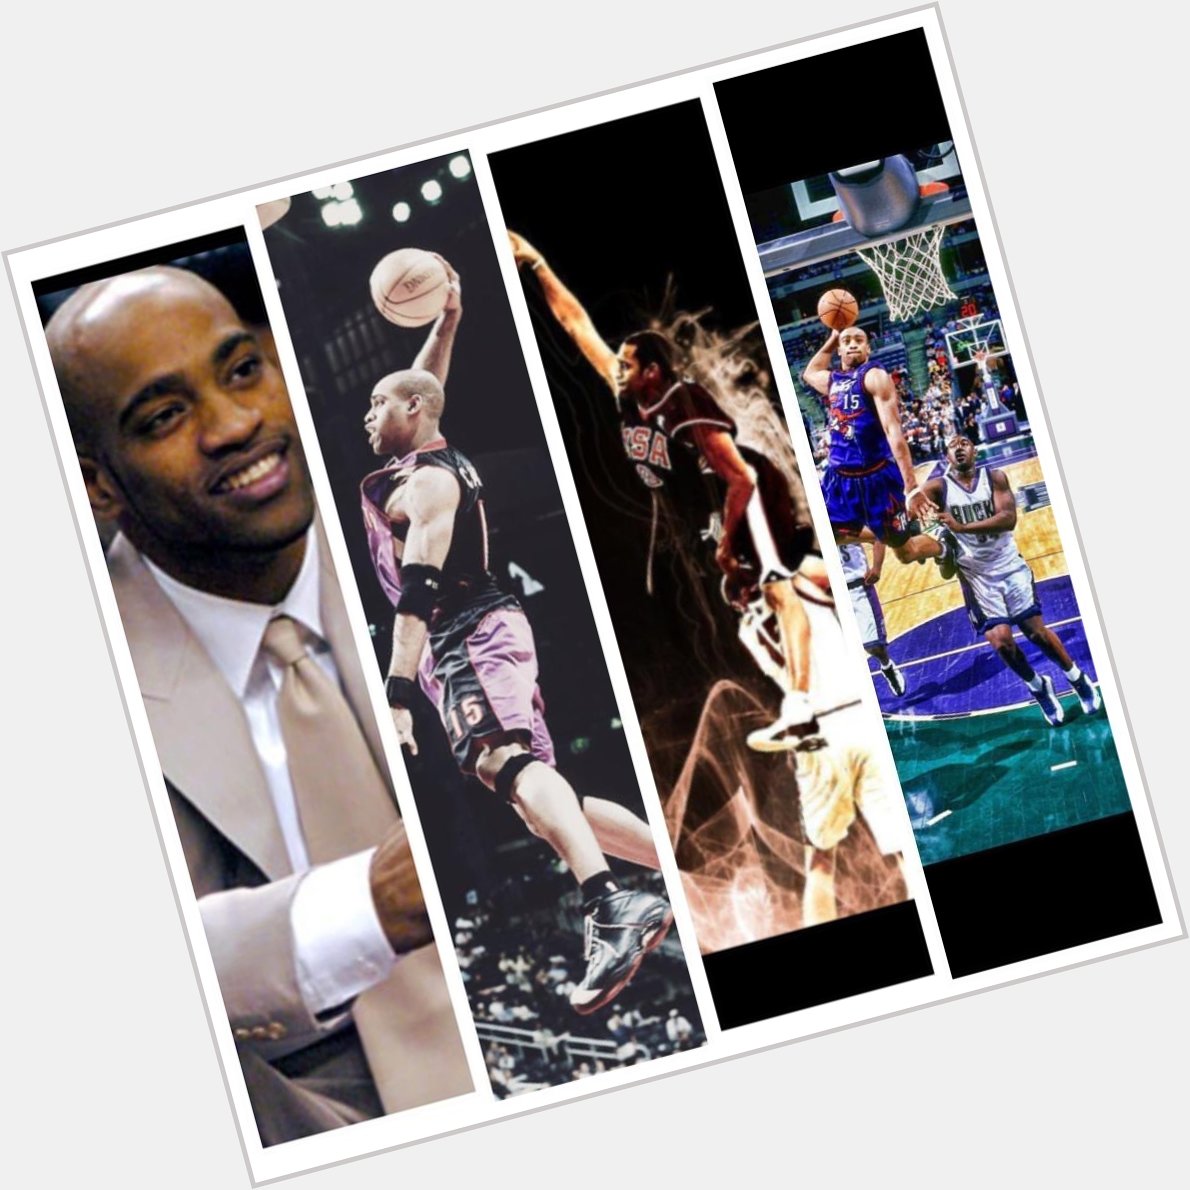 Happy Birthday to my idol Vince Carter. Legendary career and inspiration to alot 